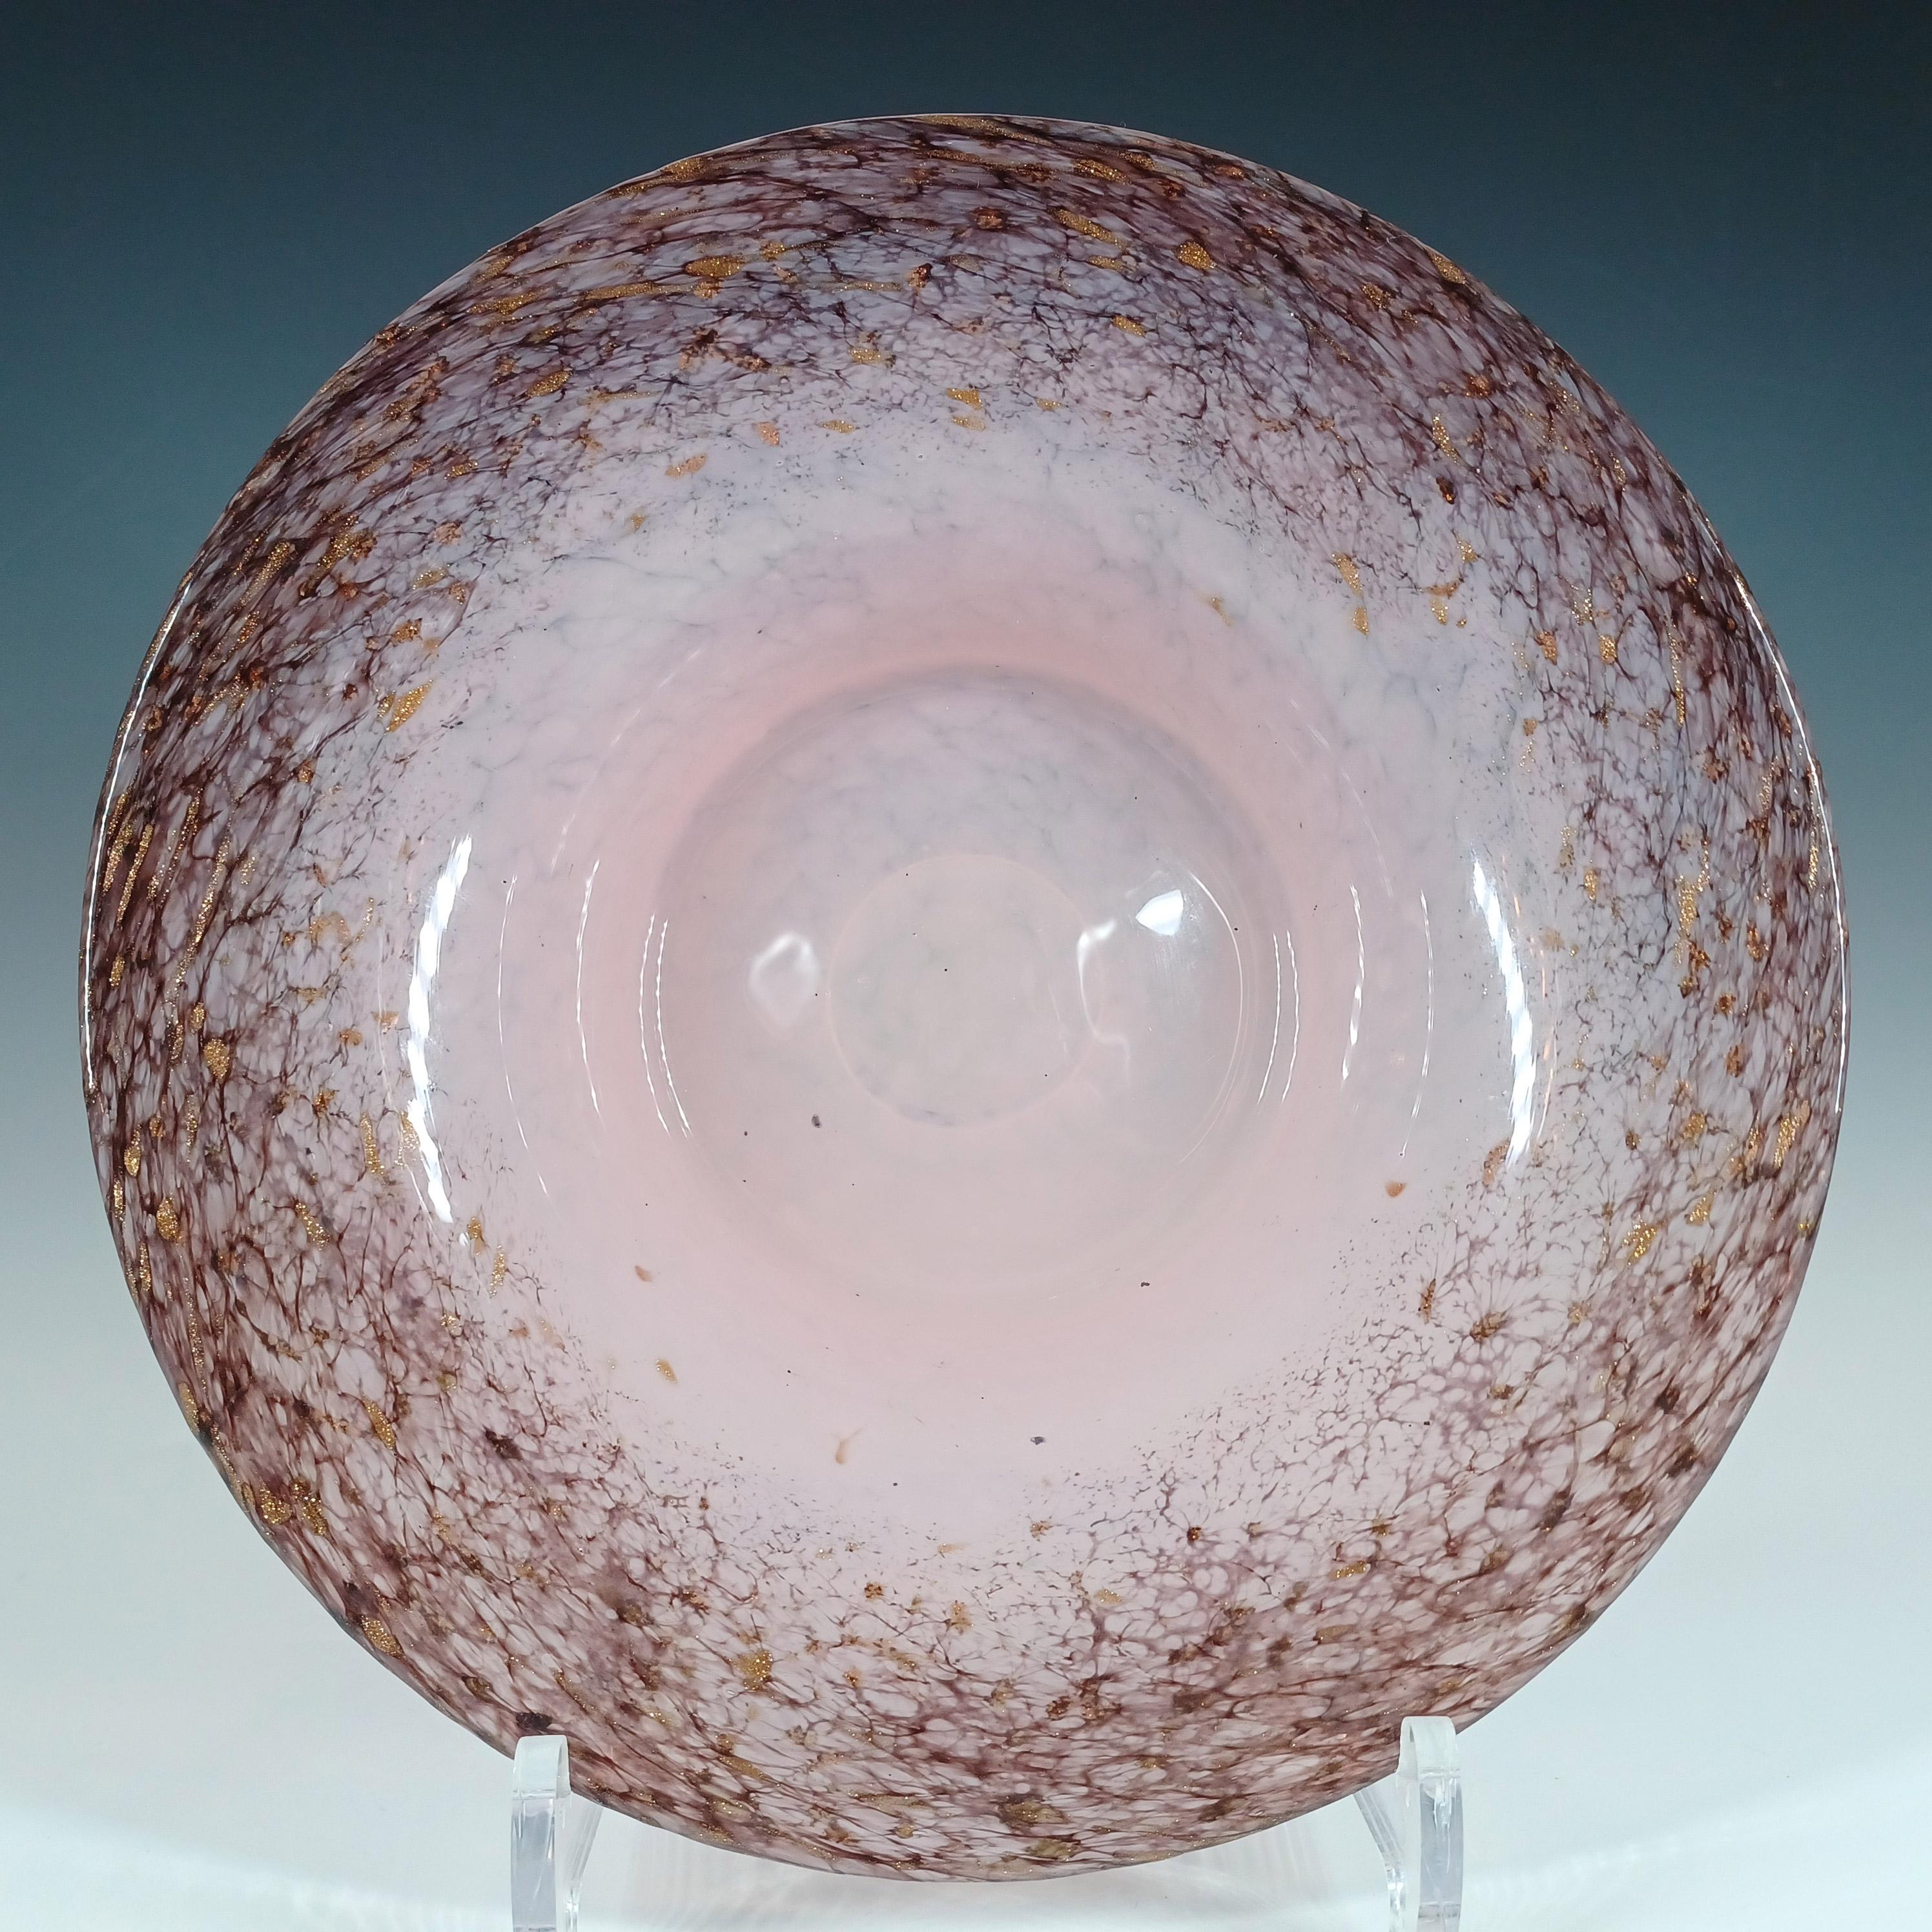 A Monart pink & black mottled glass bowl with speckles of copper aventurine. Made by the Scottish Moncrieff's factory in the 1930's/40's, pattern number UB.VII. Breaking the pattern number down, UB is the shape number, and VII is the size (8.5 inch